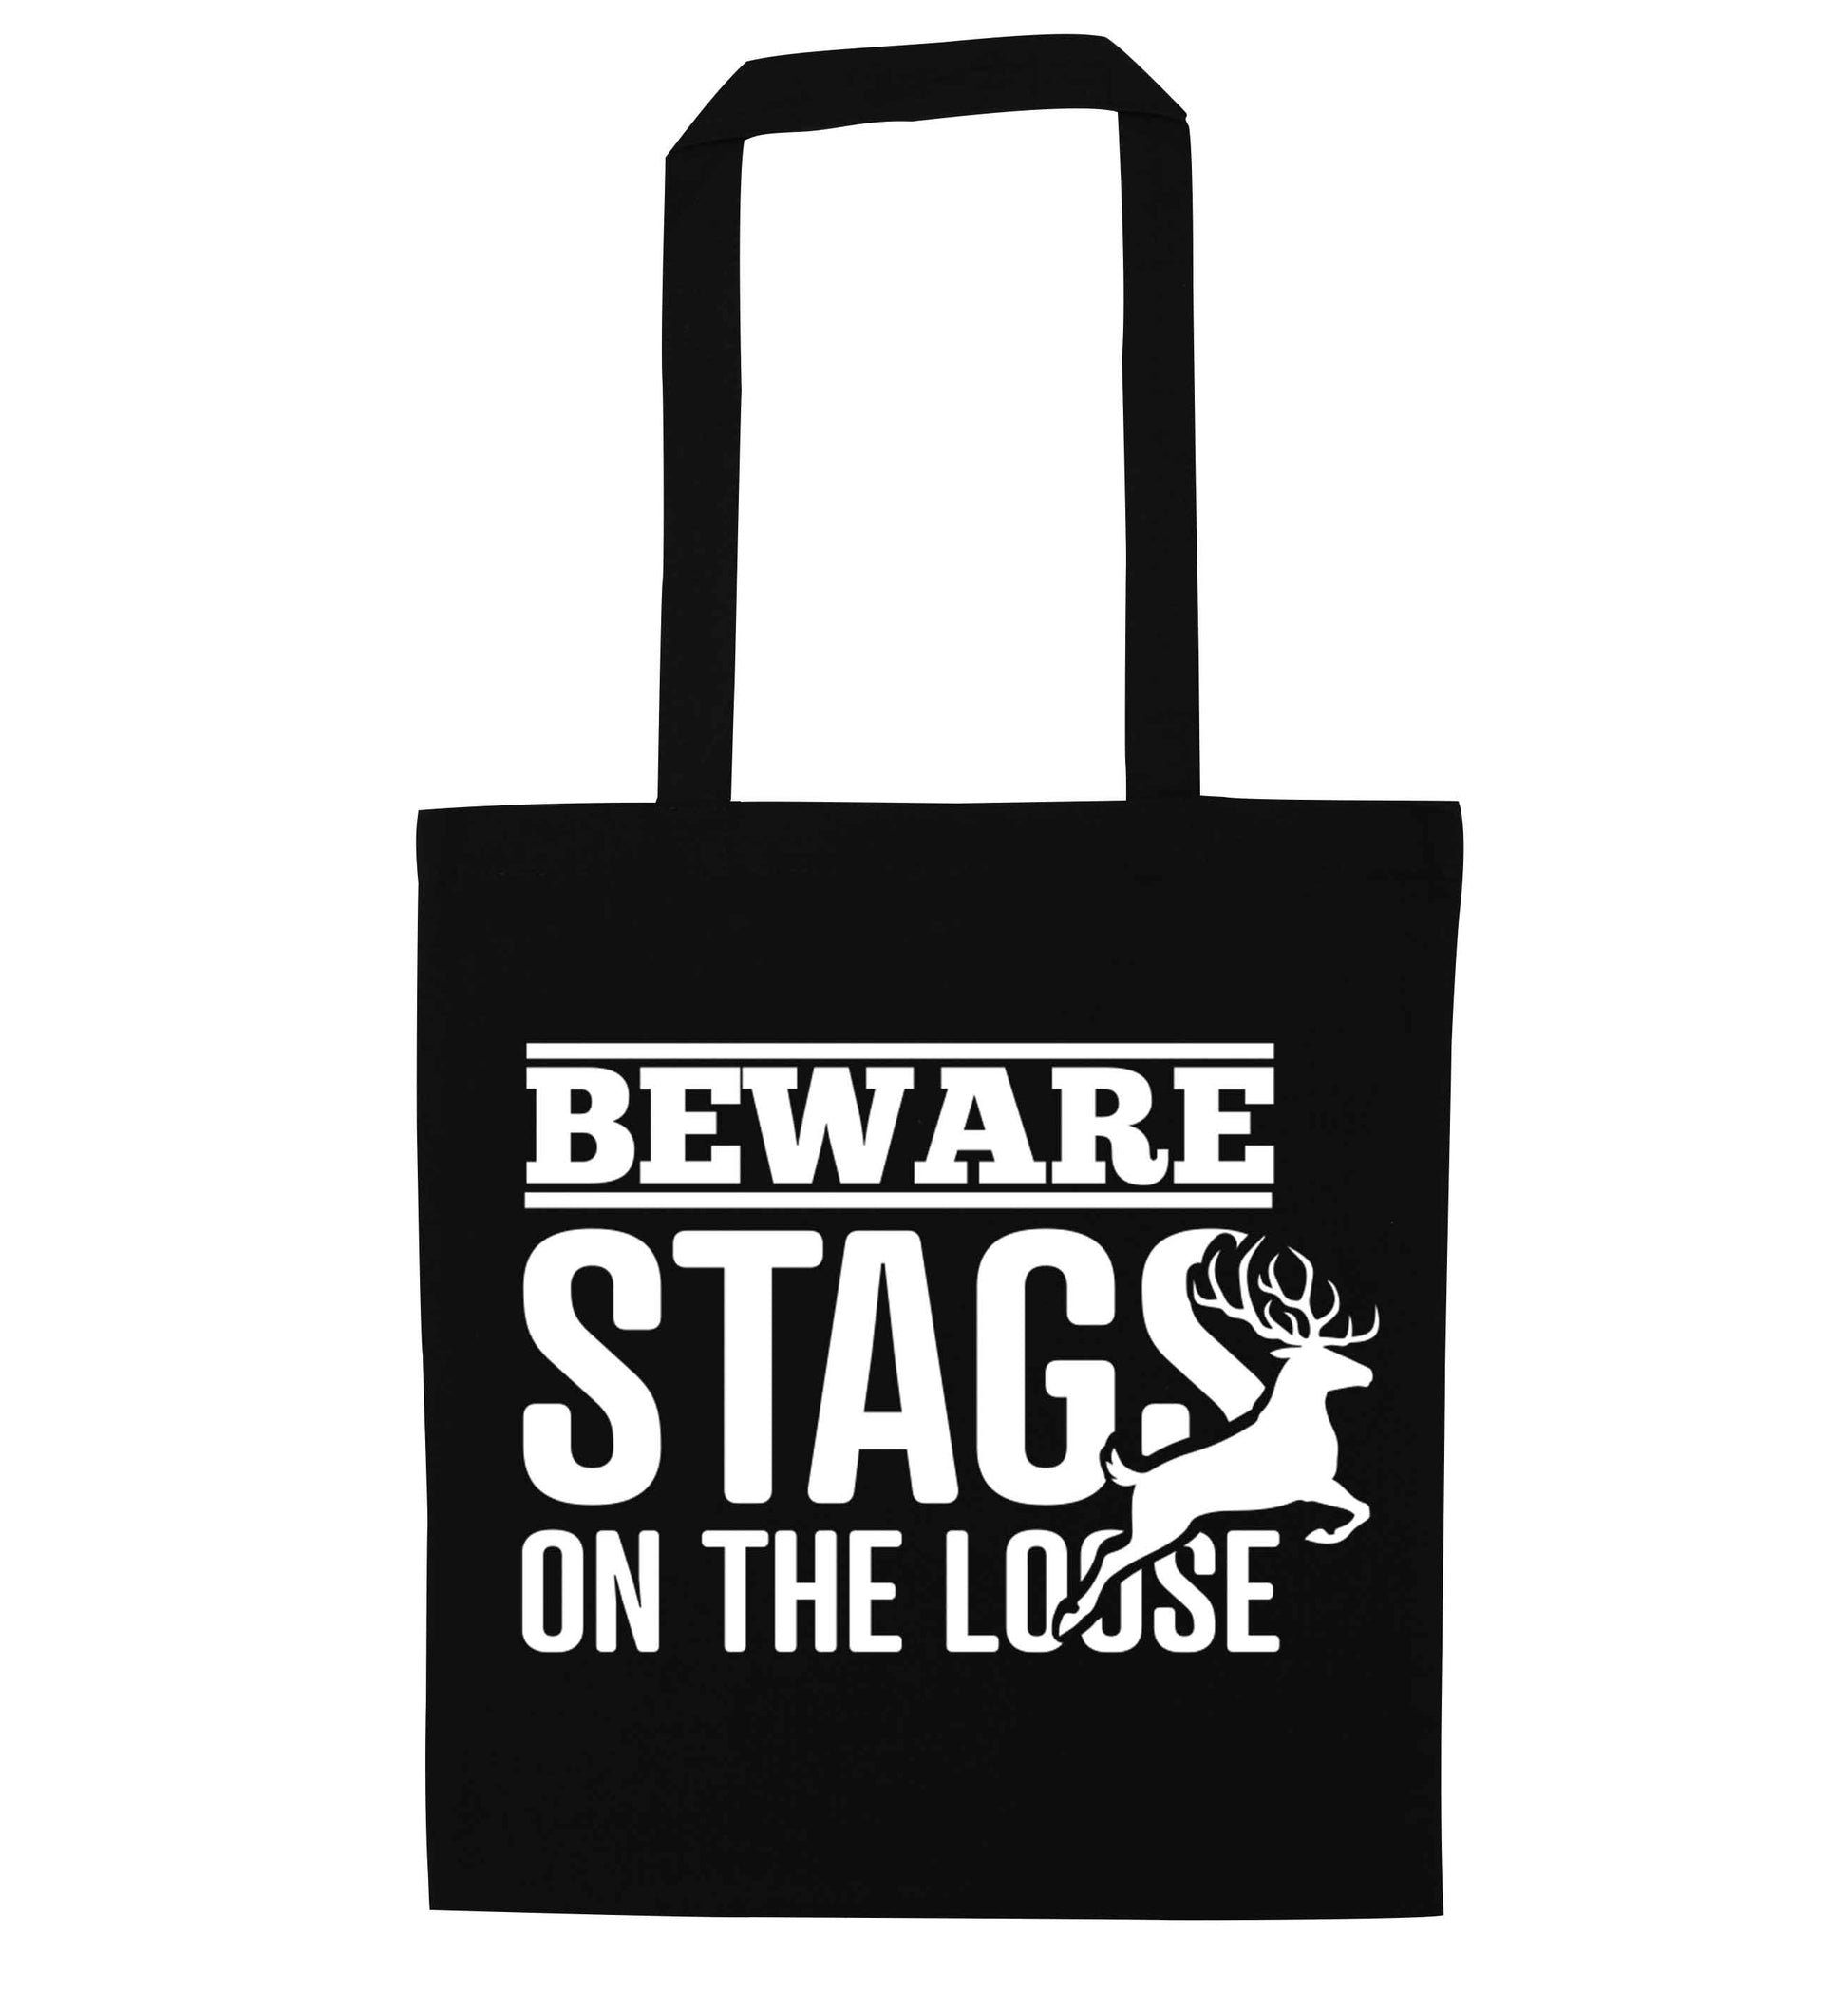 Beware stags on the loose black tote bag